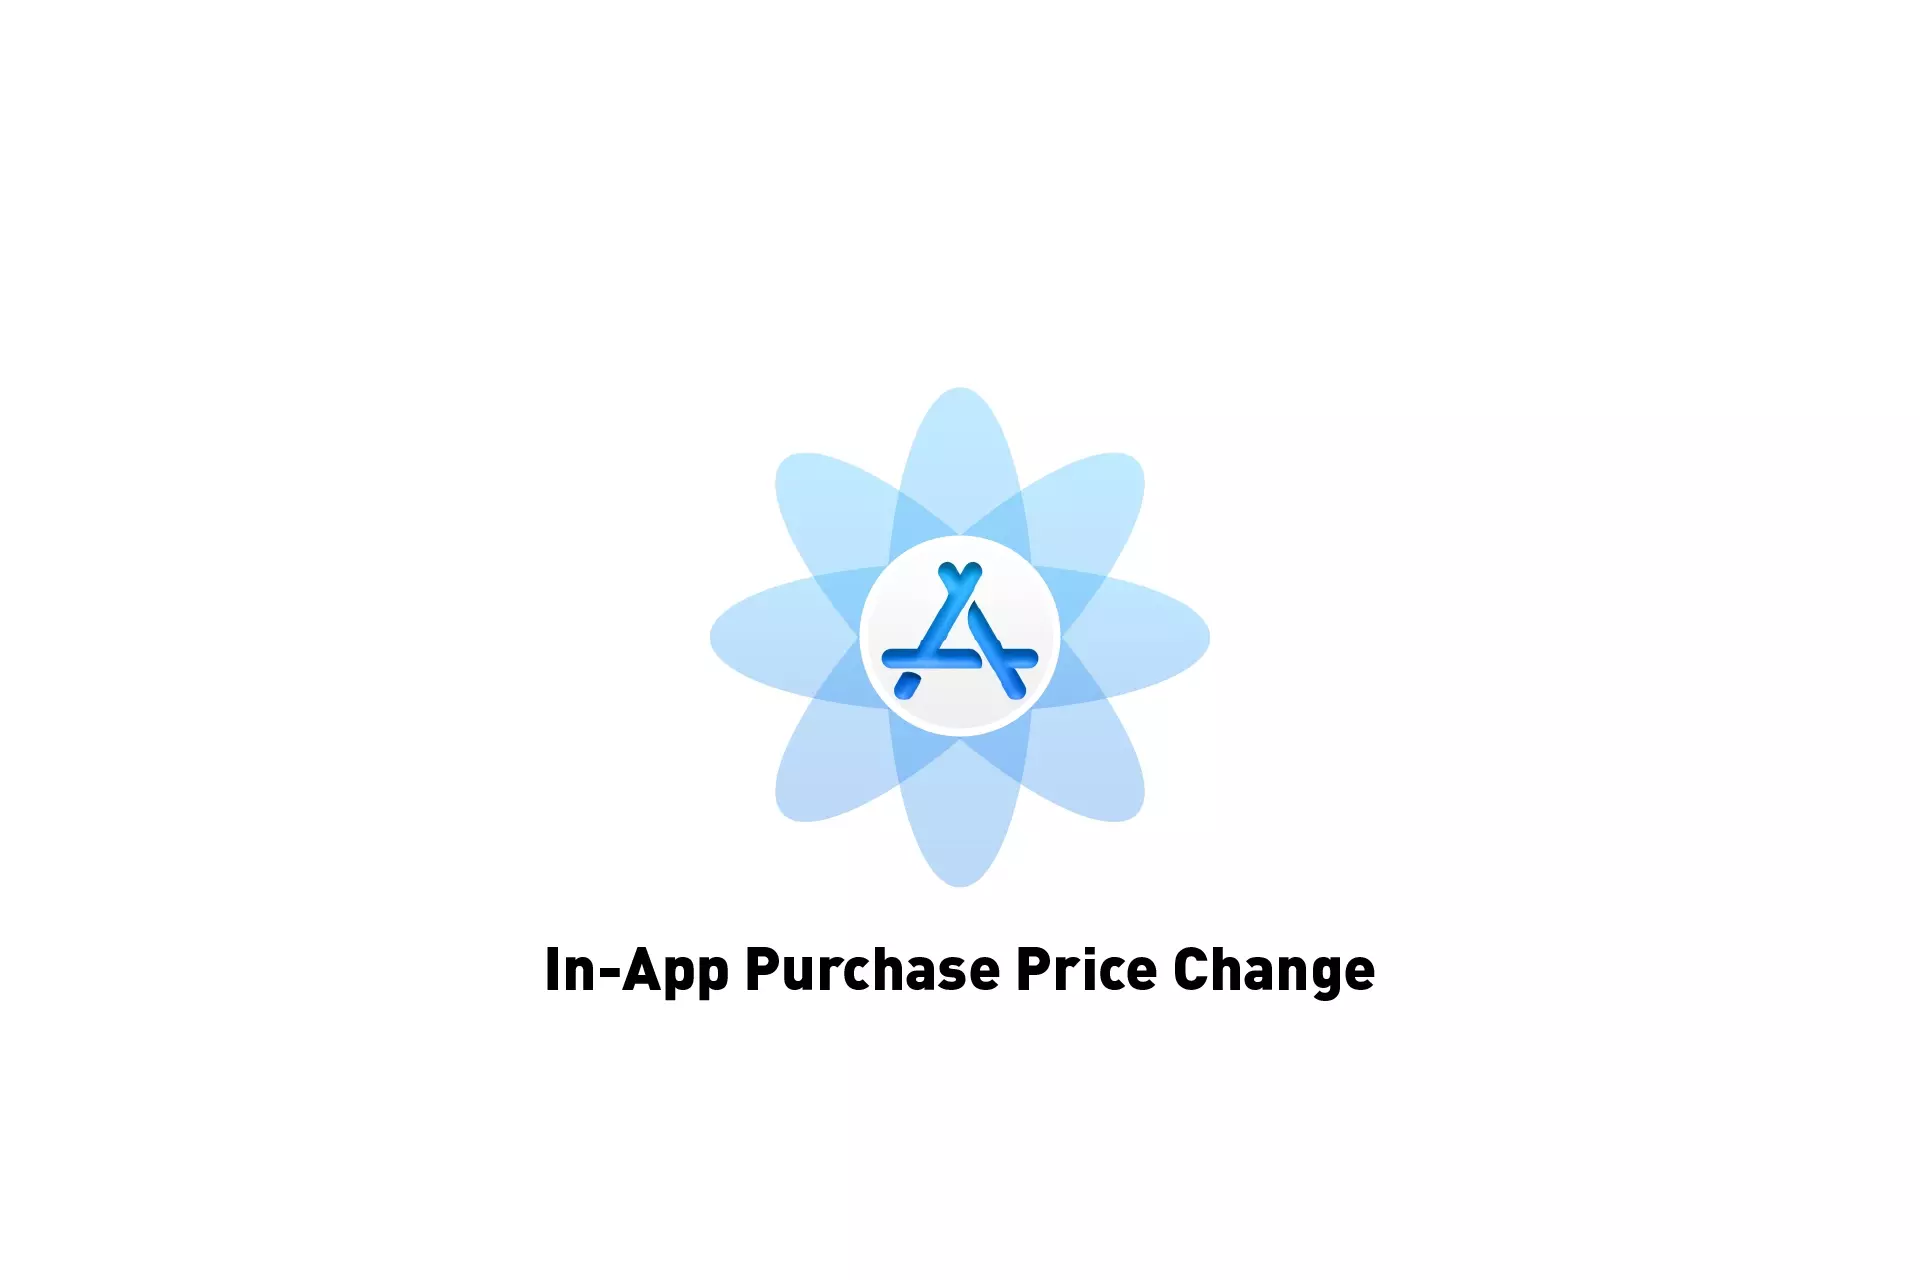 A flower that represents App Store Connect with the text "In-App Purchase Price Change" beneath it.